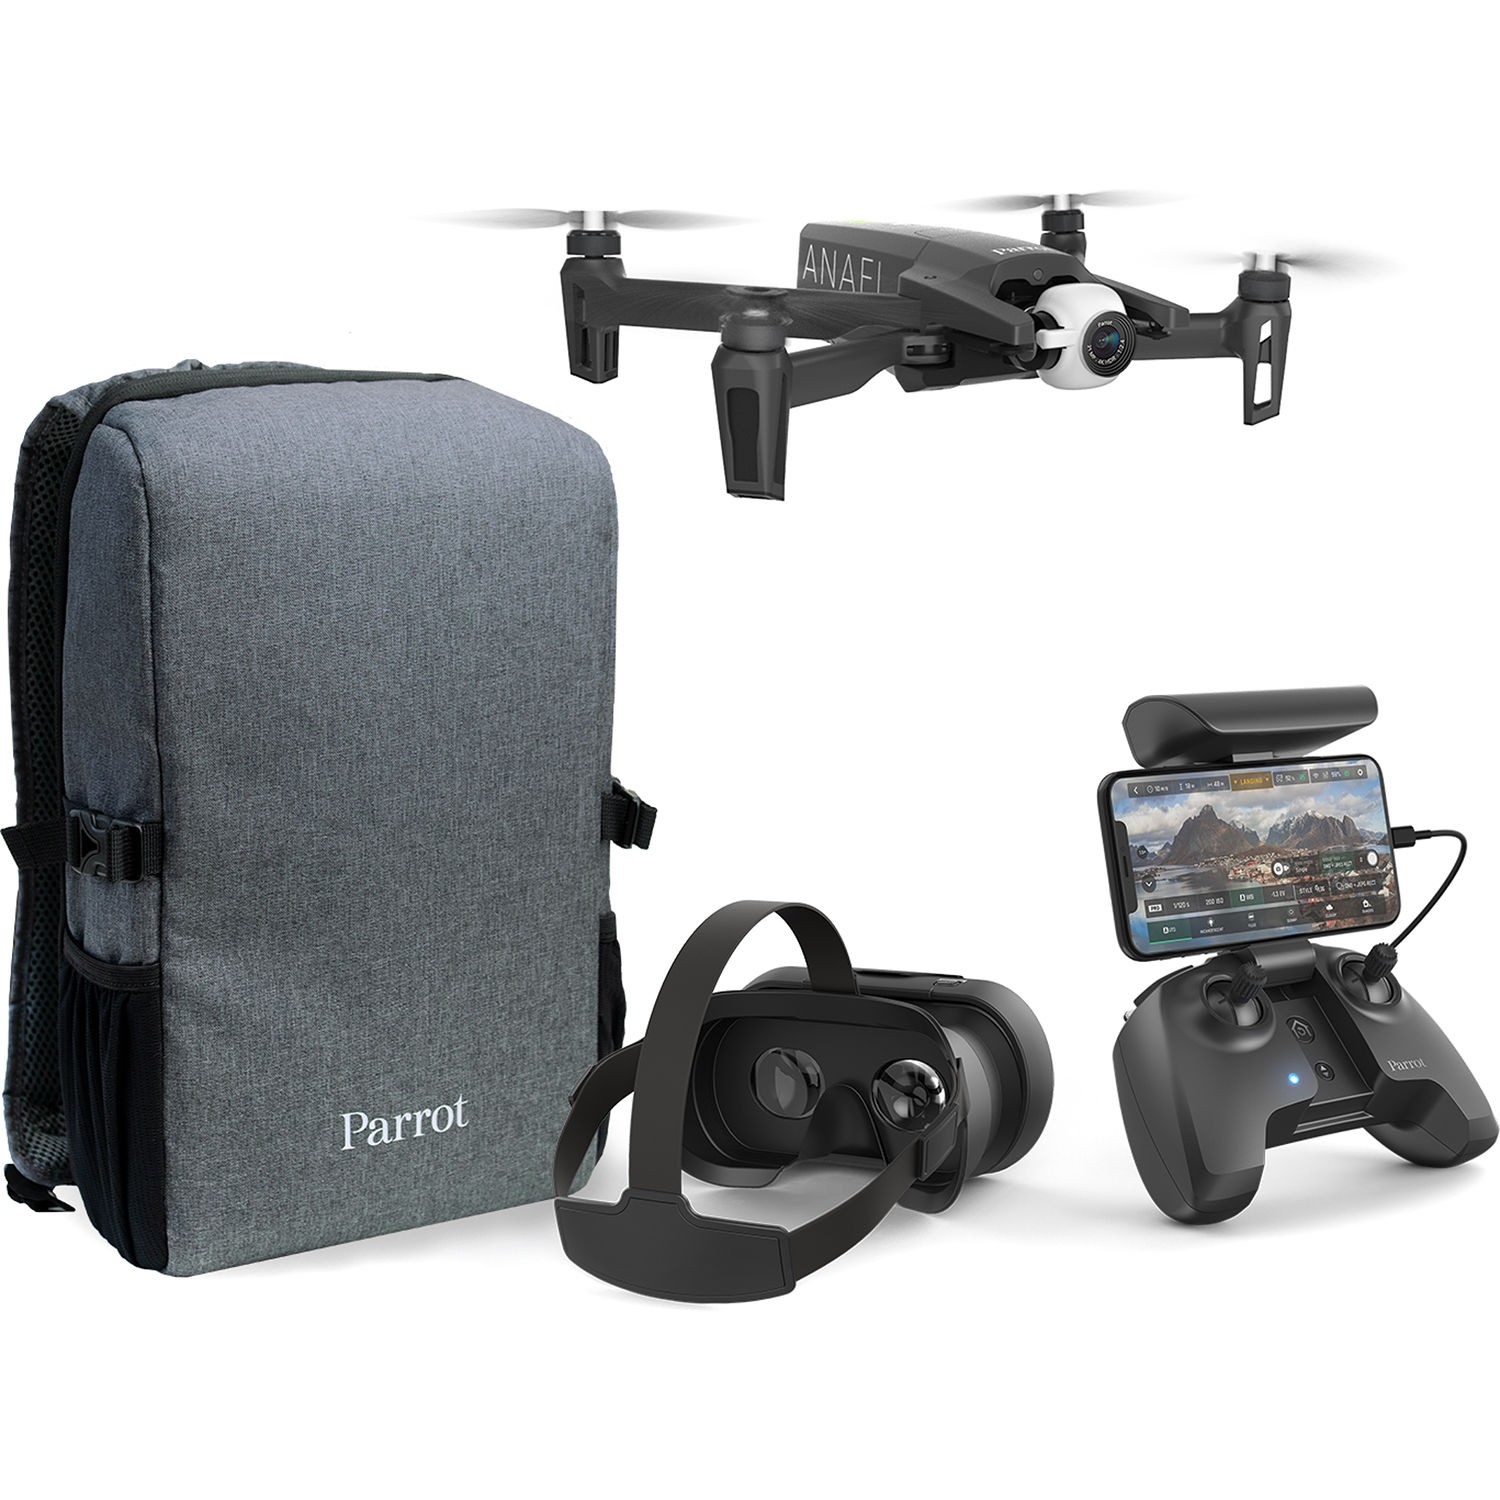 Parrot Anafi 4K HDR Camera Drone + Skycontroller FPV Pack Black (PF728050AA)